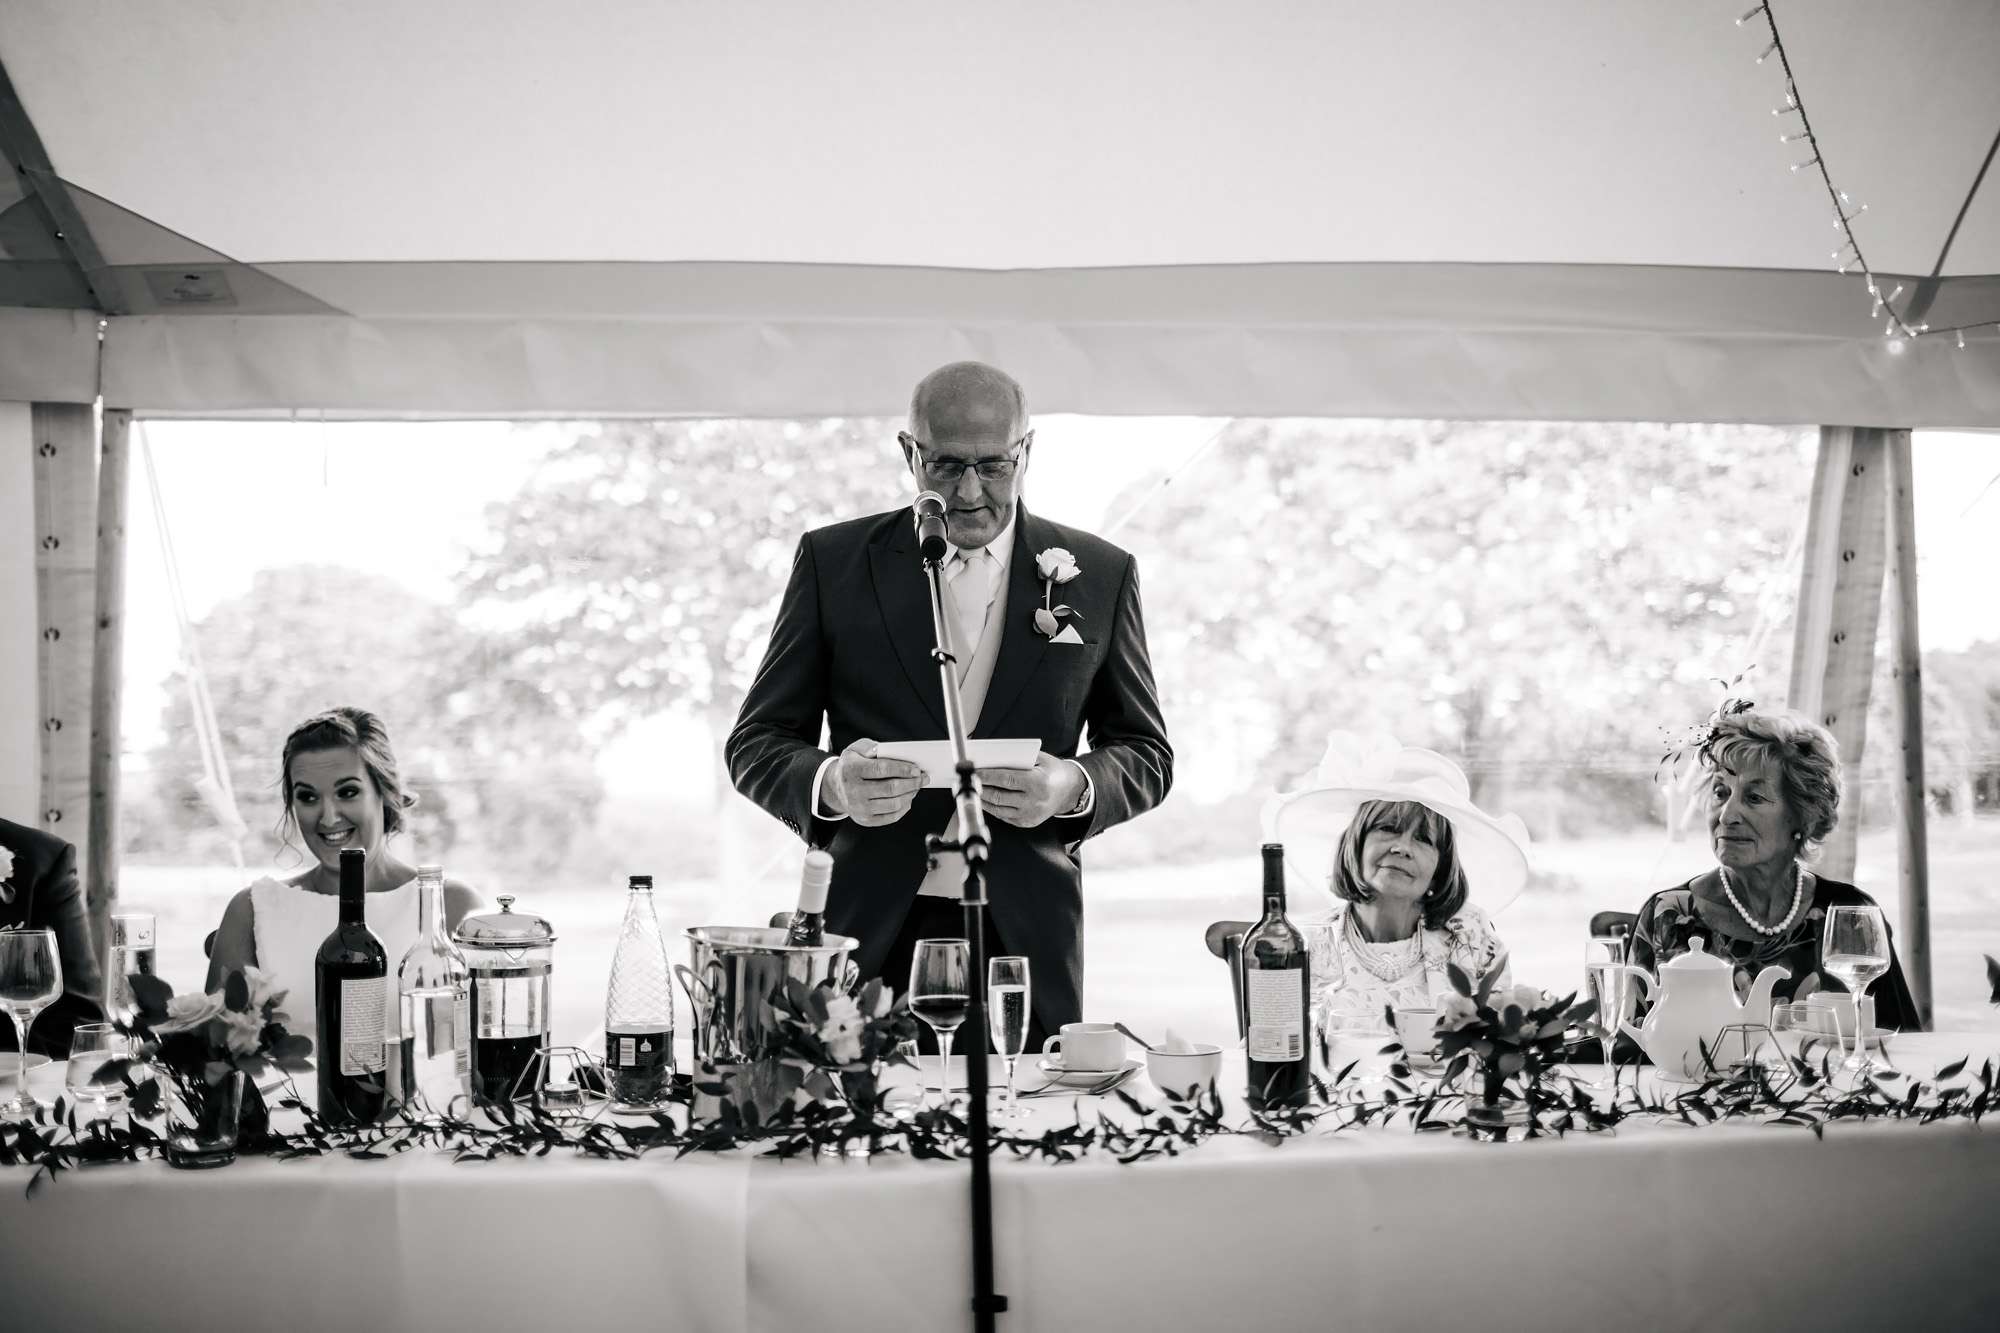 Bride's dad doing mid-speech at a wedding